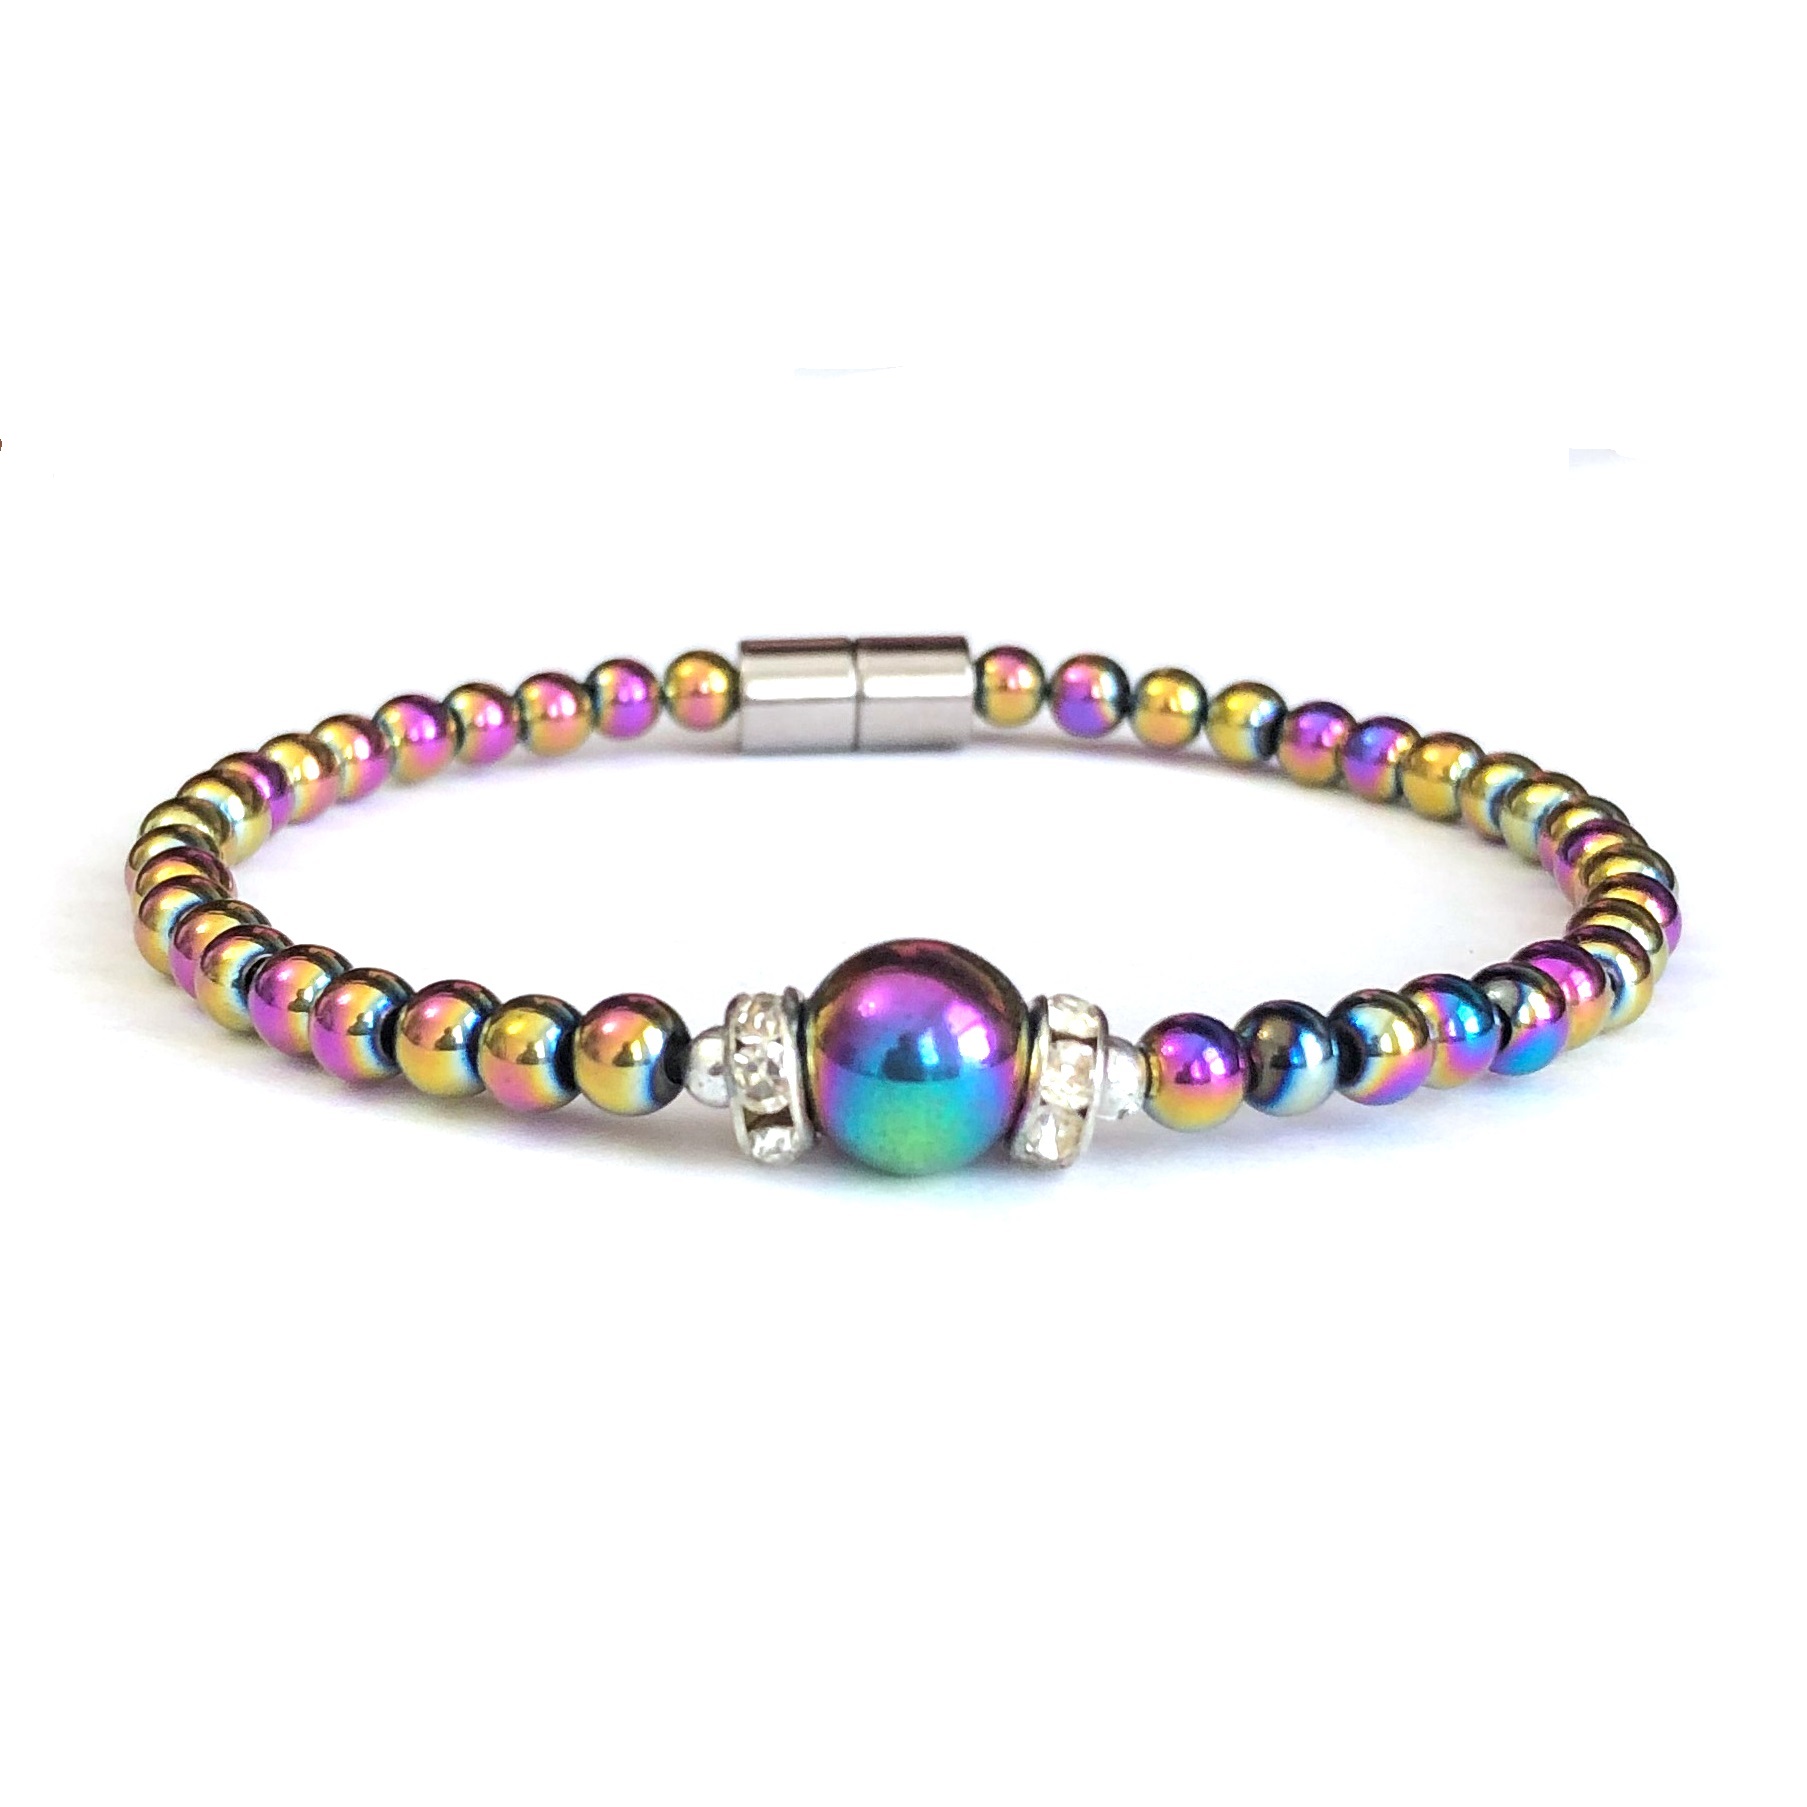 1 PC. Rainbow Beads Magnetic Hematite Bracelets With Magnetic Clasp #MHB-014